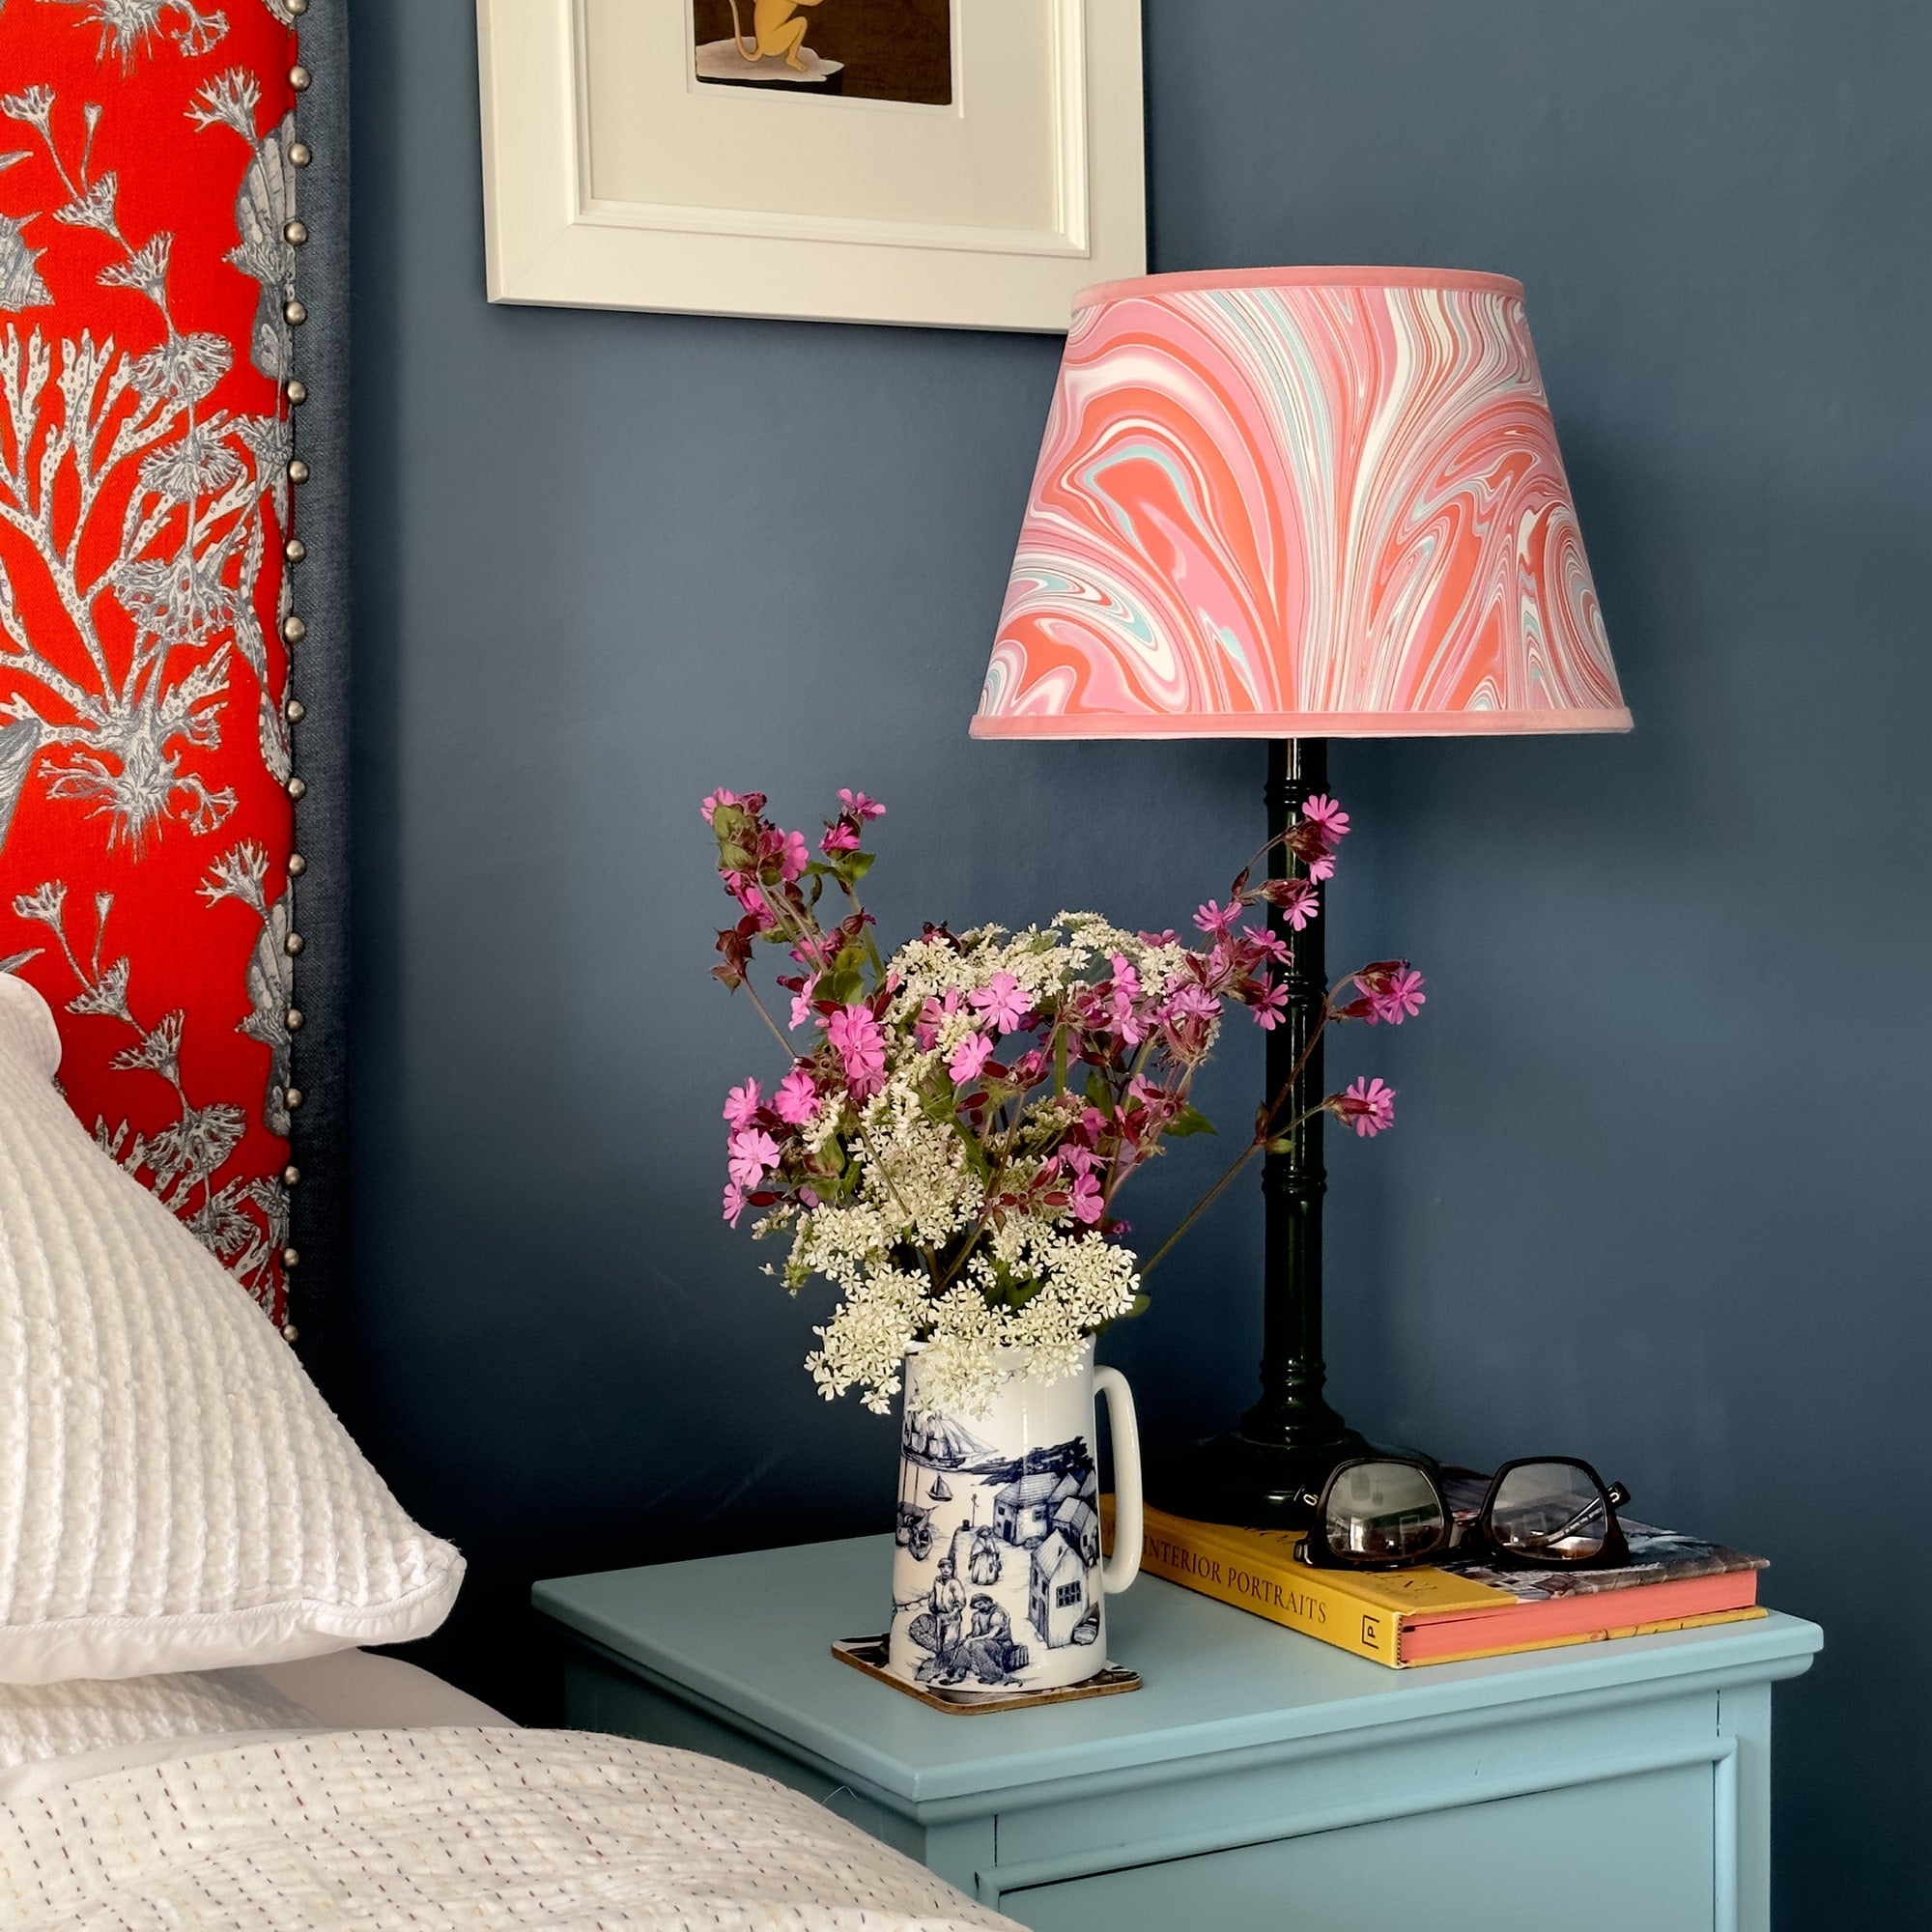 A medium white jug with a navy illustrated harbour scene on it filled with wold flowers in white and pink. This is sitting on pale blue bedside cabinet with a book and reading glasses next to it and a dark green glossy lamp base and an orange marbled effect lampshade. all this is set again a lovely denim blue wall.   